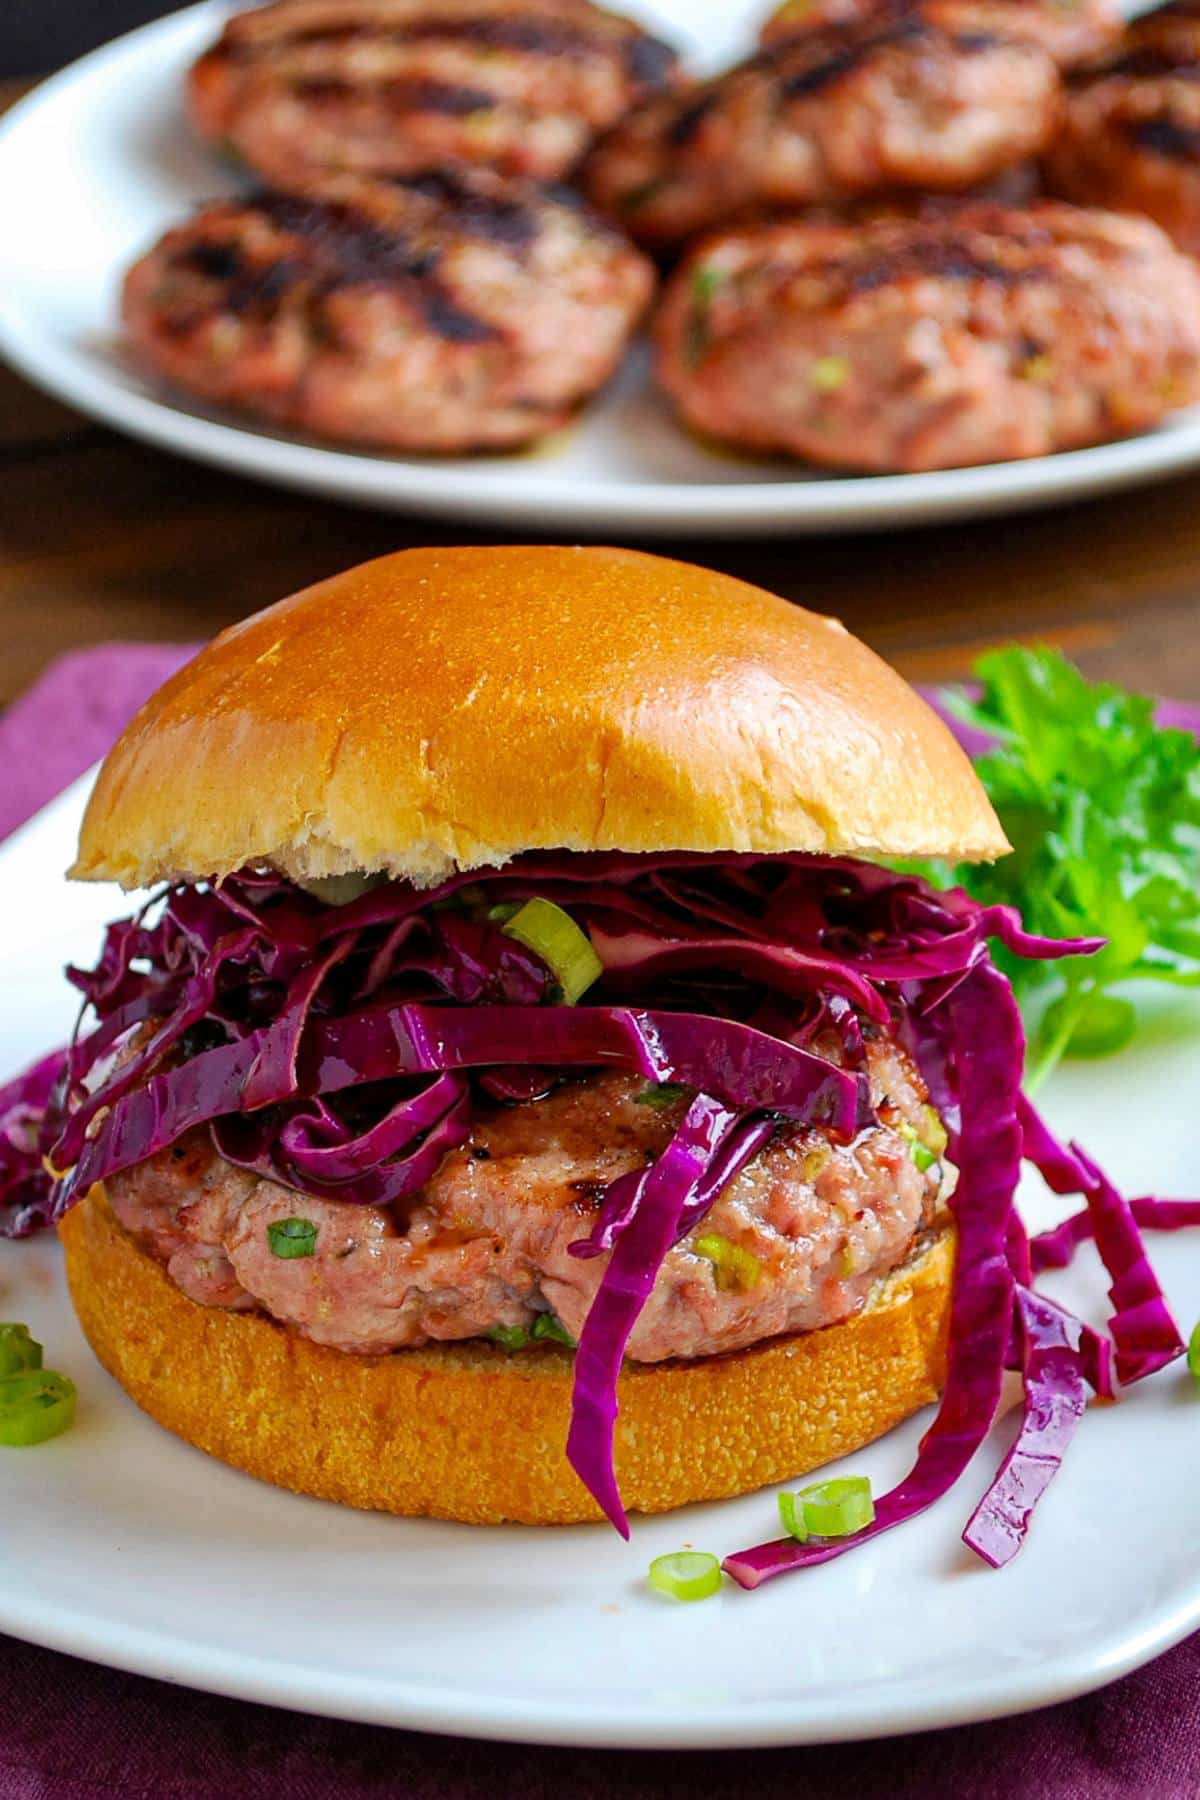 a grilled pork burger topped with red cabbage slaw on a plate with a plate of burgers behind it